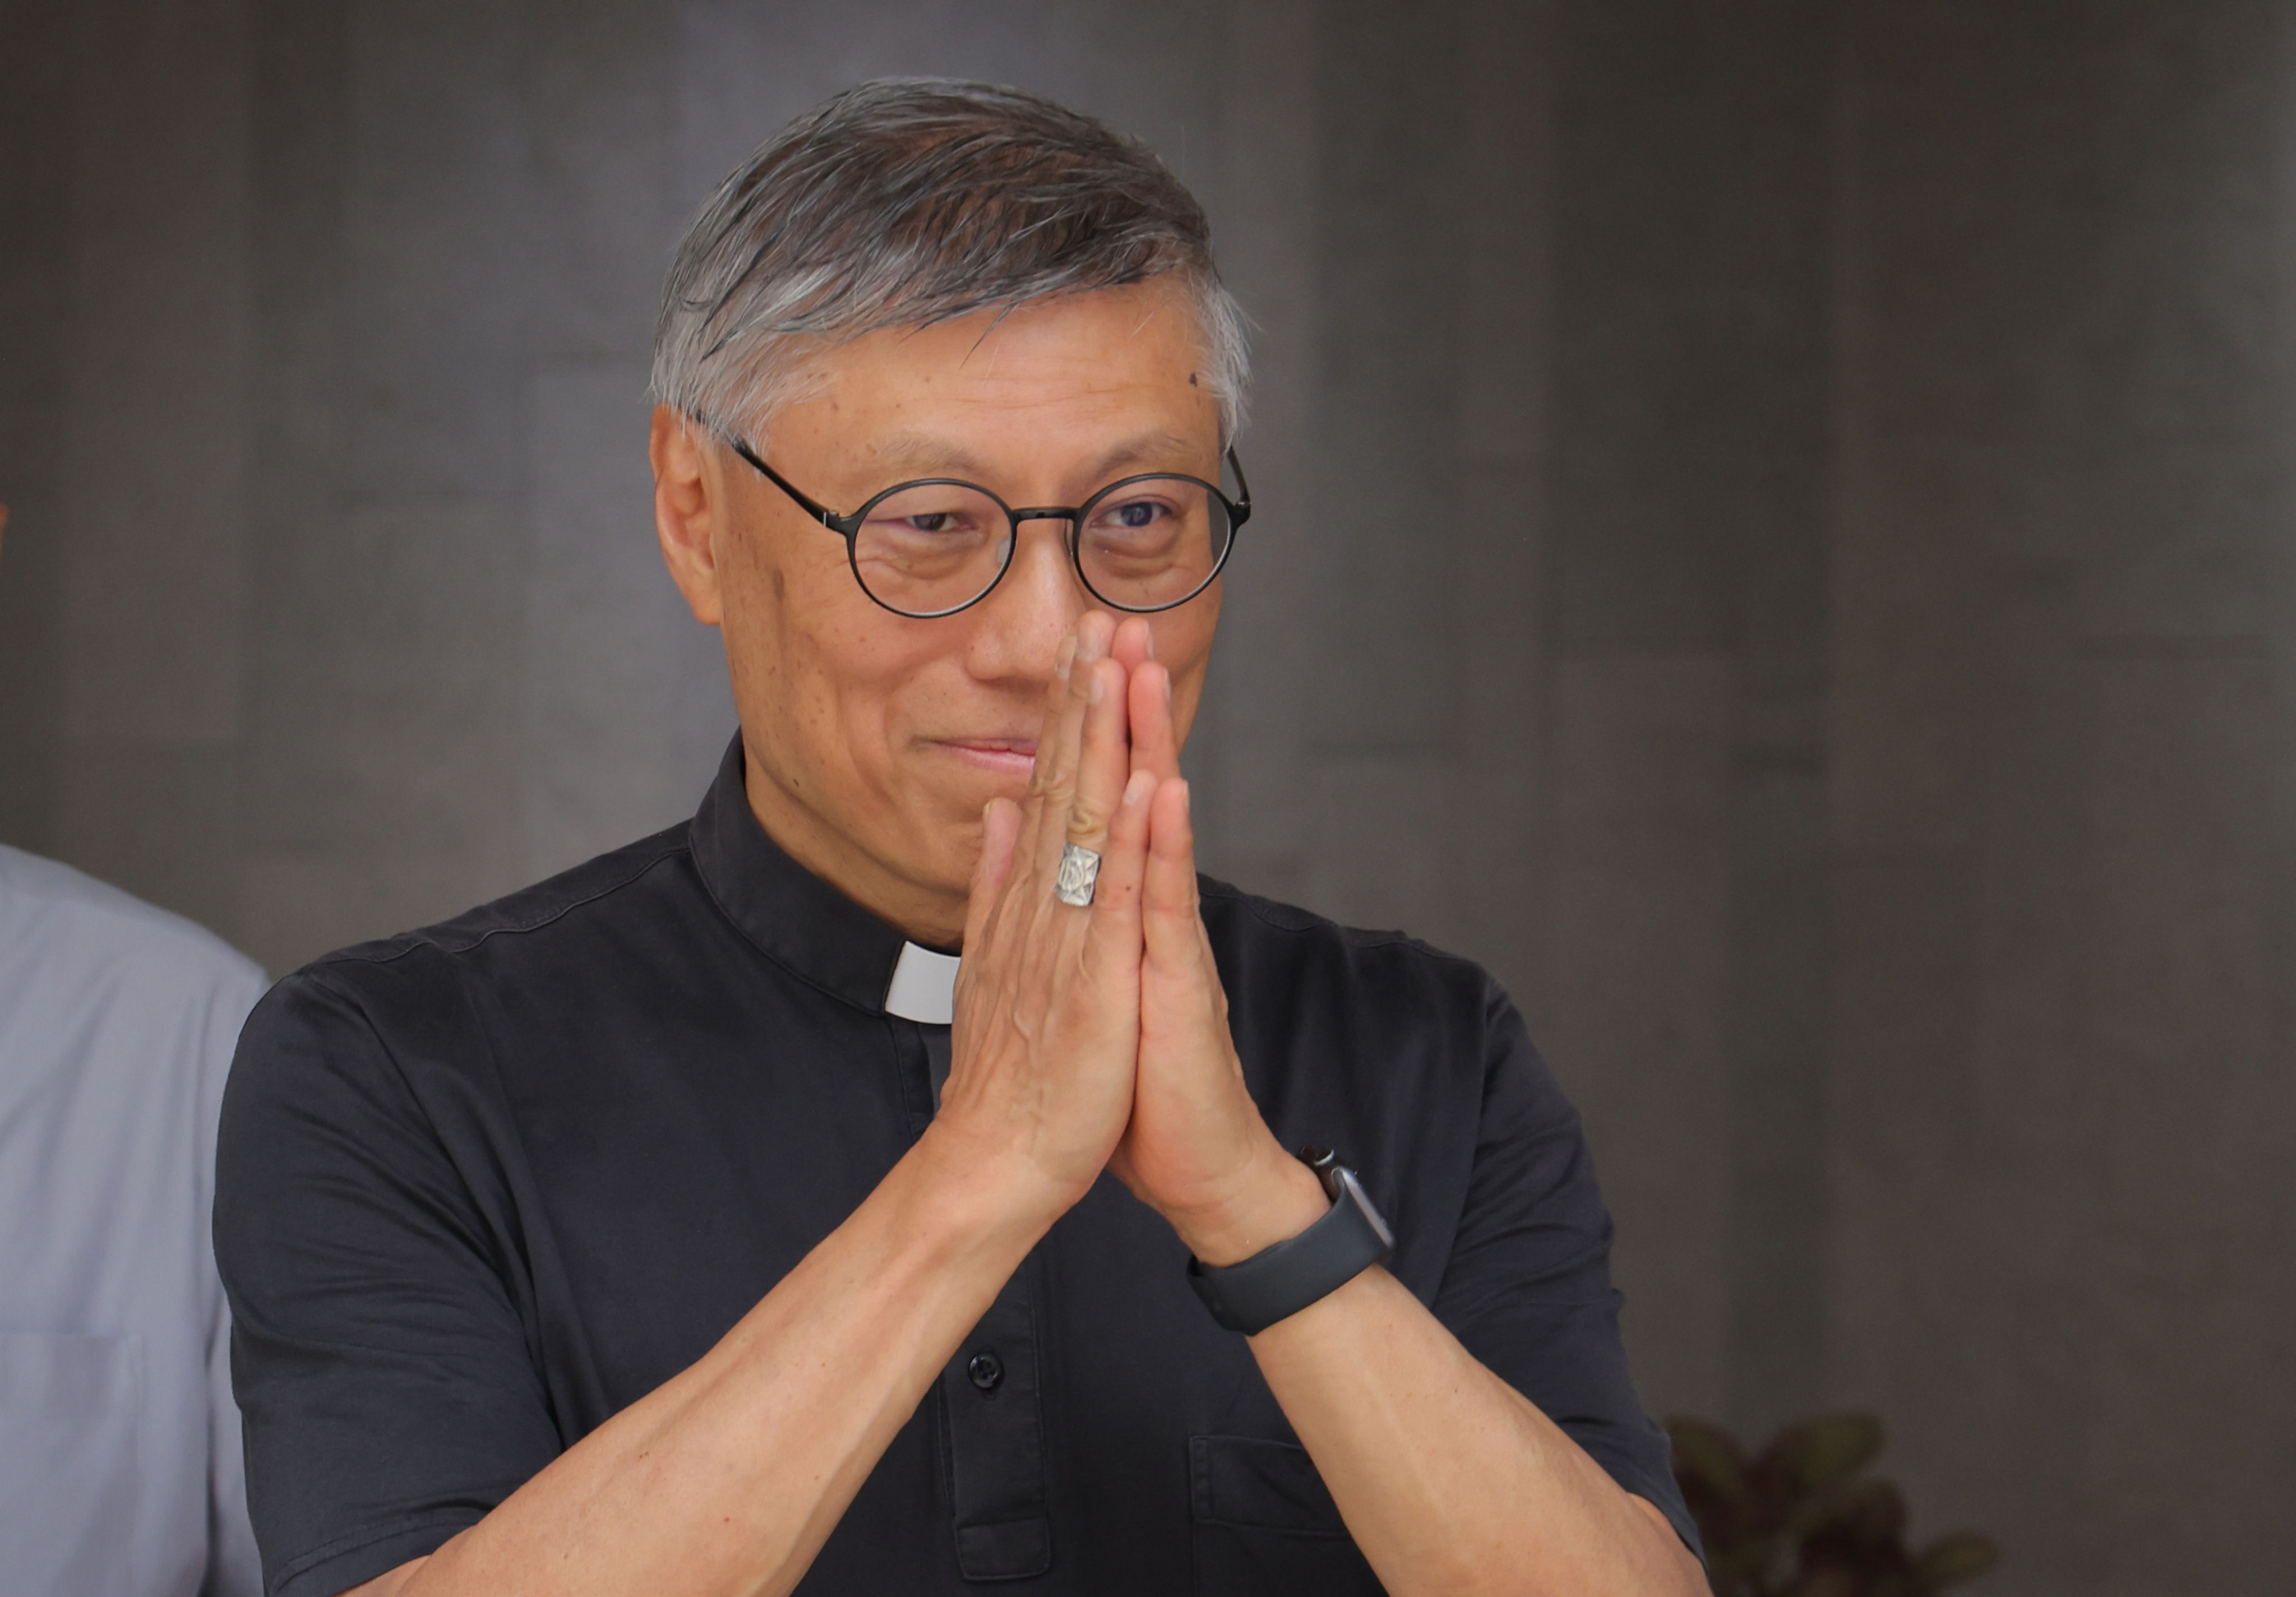 Stephen Chow Sau-yan, Hong Kong’s Catholic Bishop, has called for forgiveness ahead of 35th anniversary of the Tiananmen Square crackdown. Photo: Jelly Tse